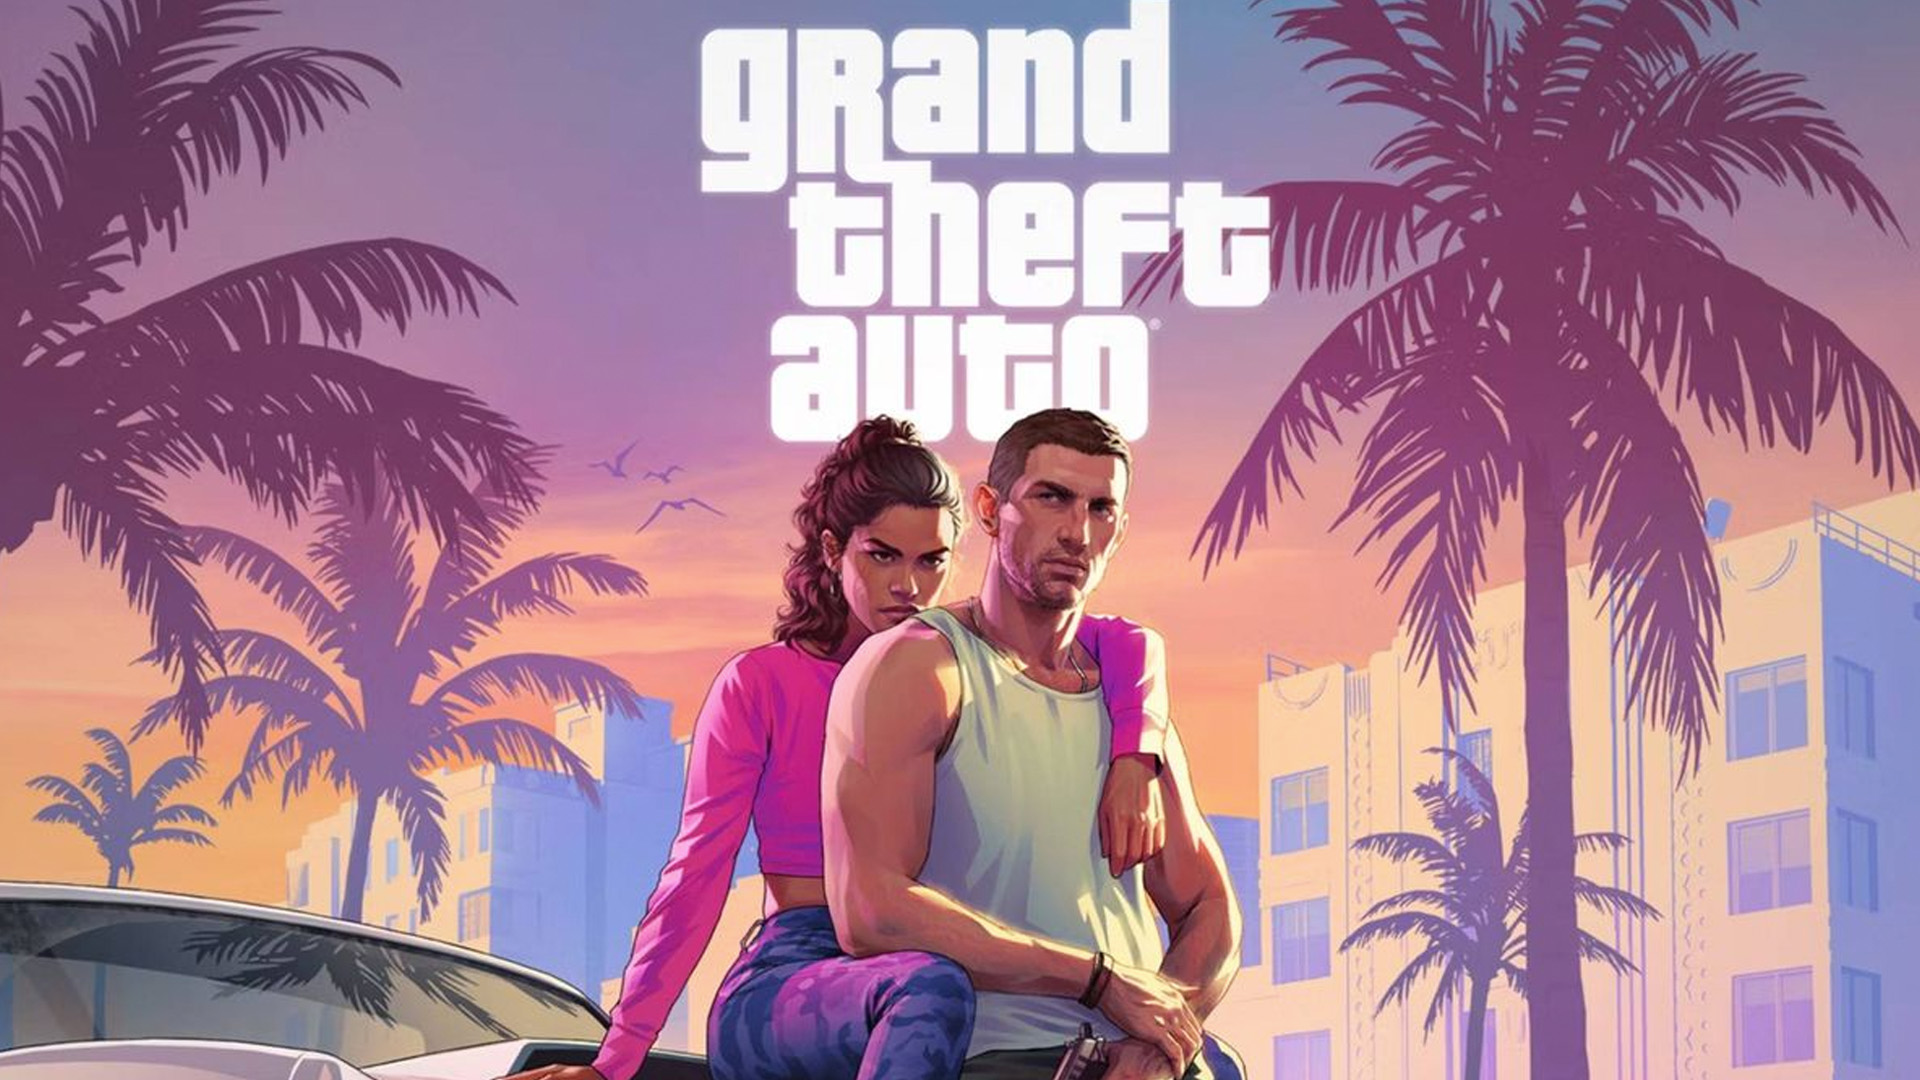 GTA 6 Could Be Delayed Until 2026, Reports Say